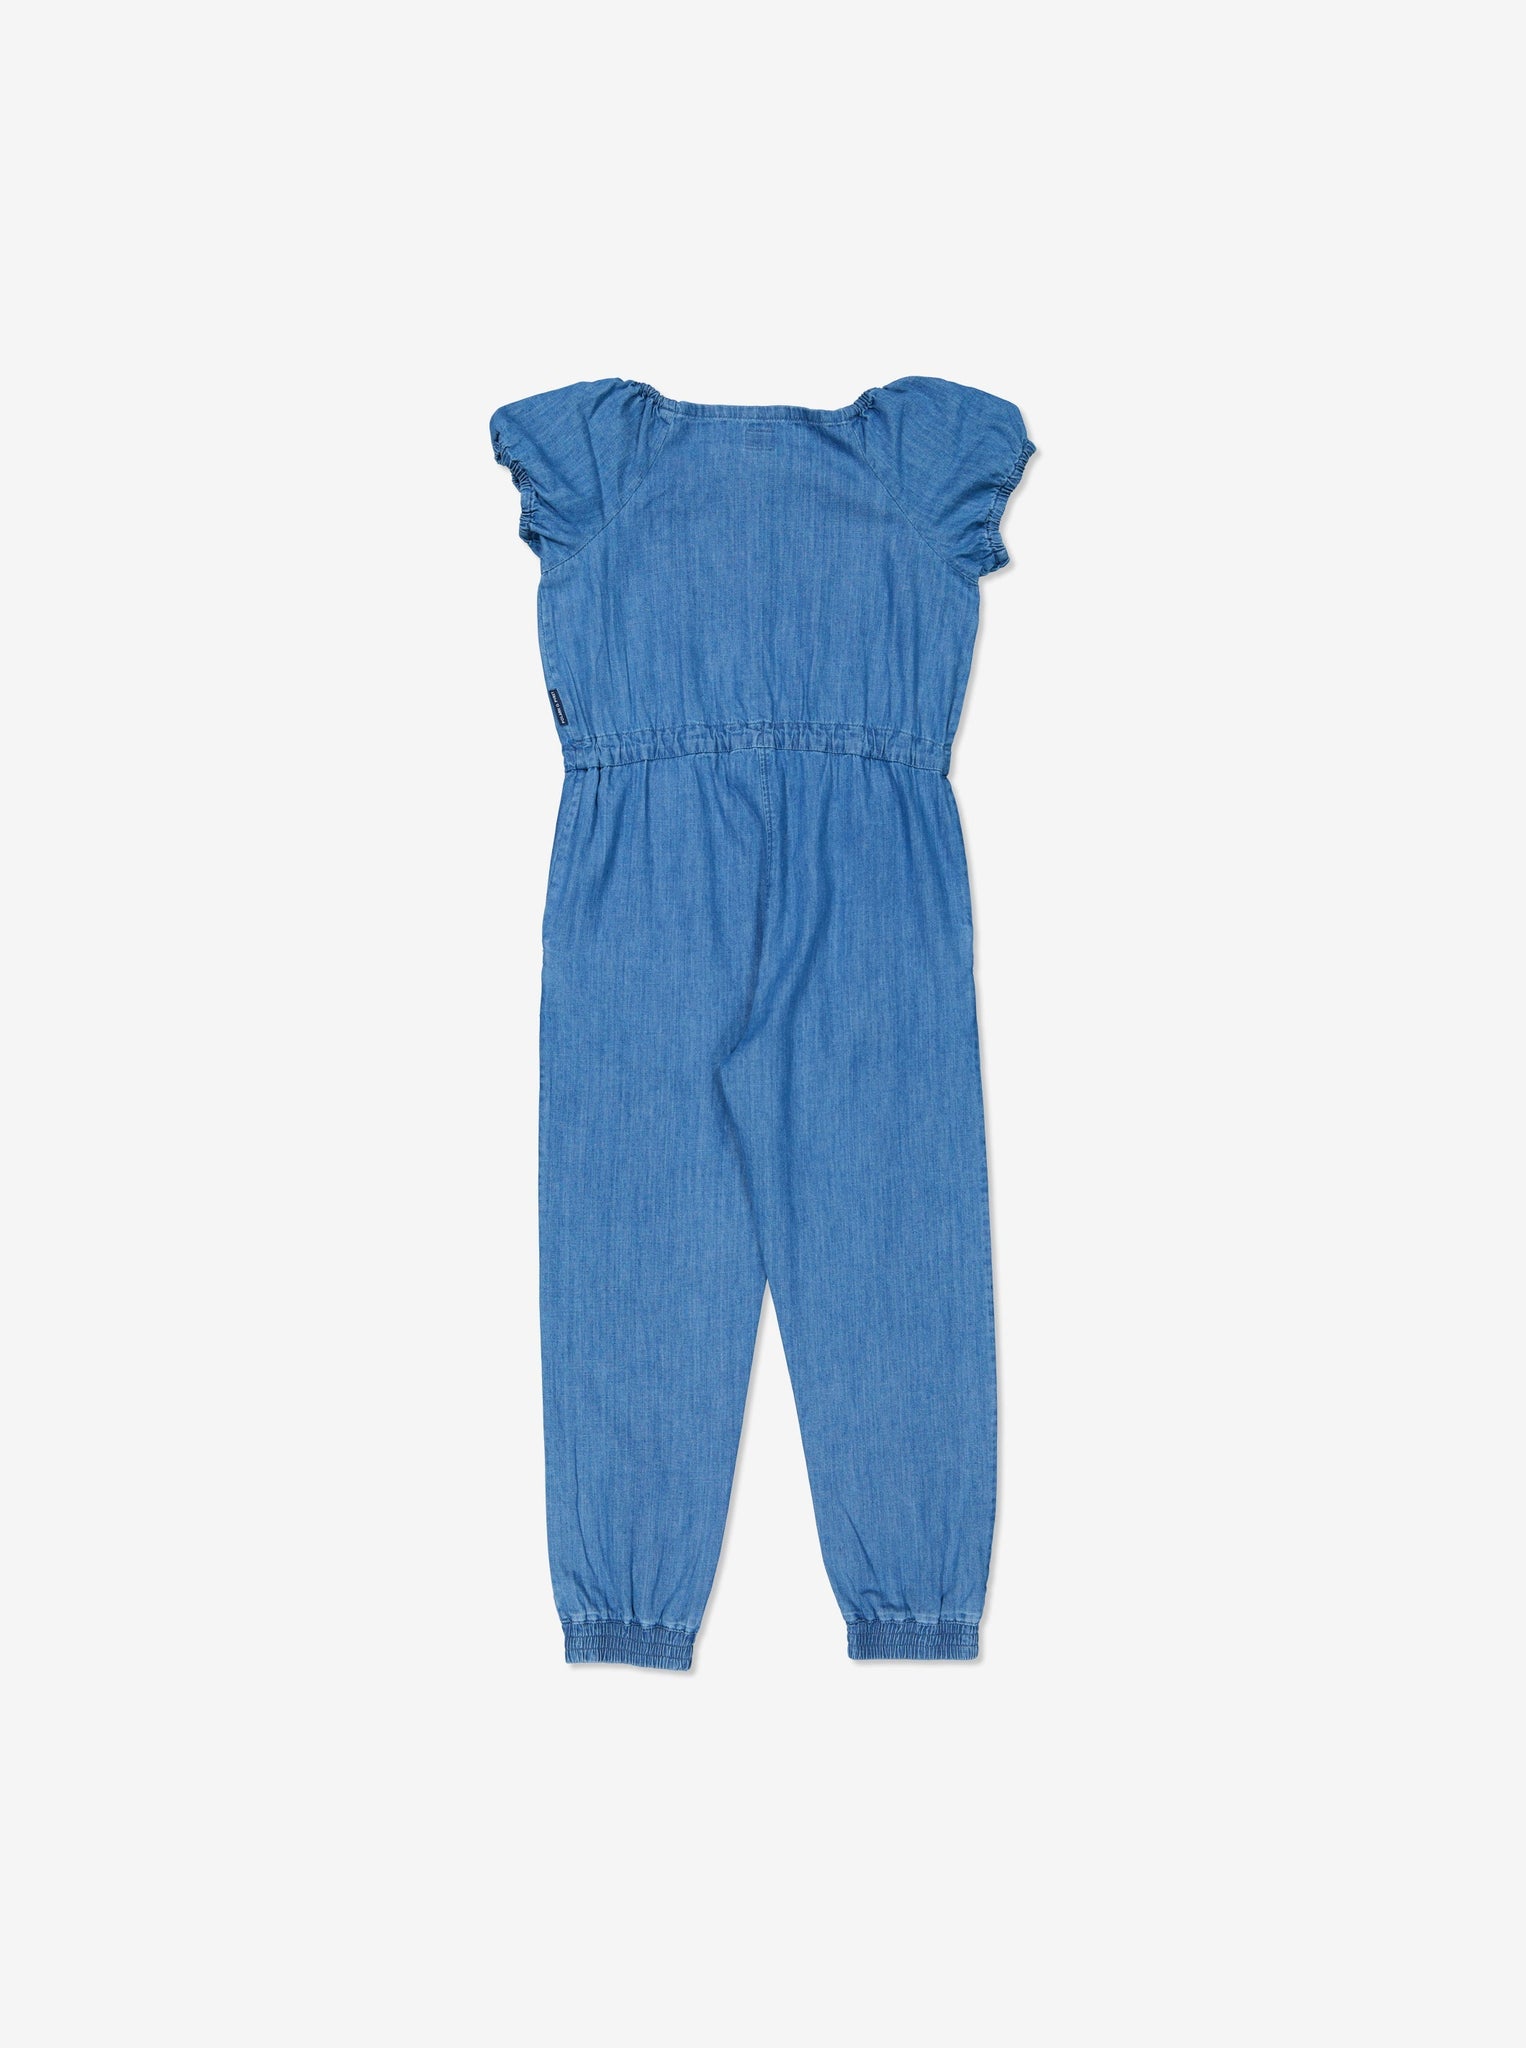  Light Denim Kids Jumpsuit from Polarn O. Pyret Kidswear. Made from sustainable materials.